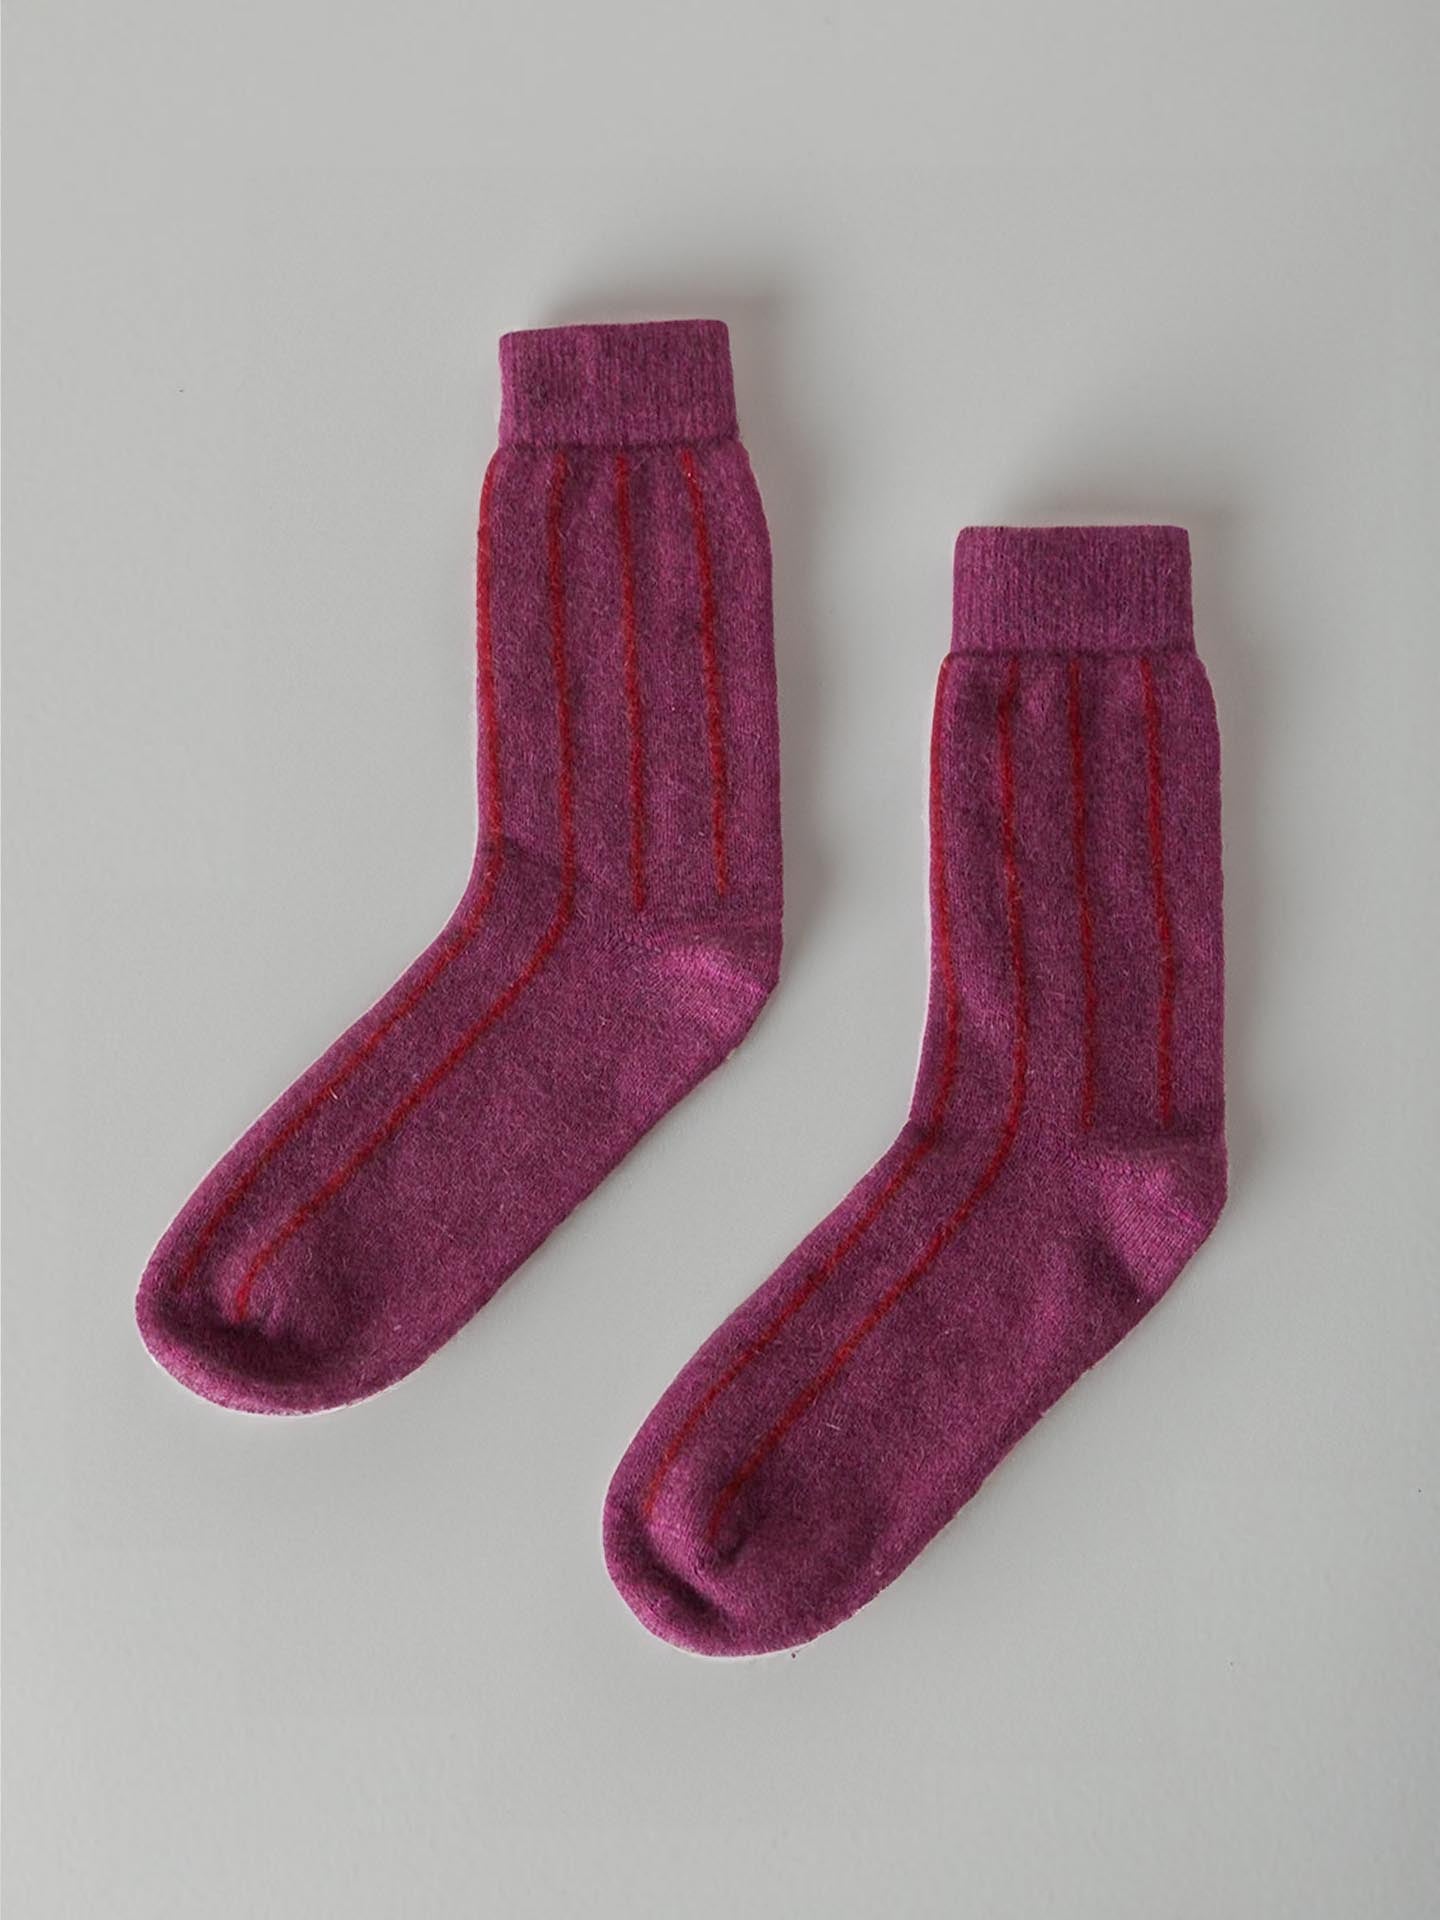 A pair of Francie Possum Merino Socks in Orchid & Poppy Stripe, displayed on a light grey background.